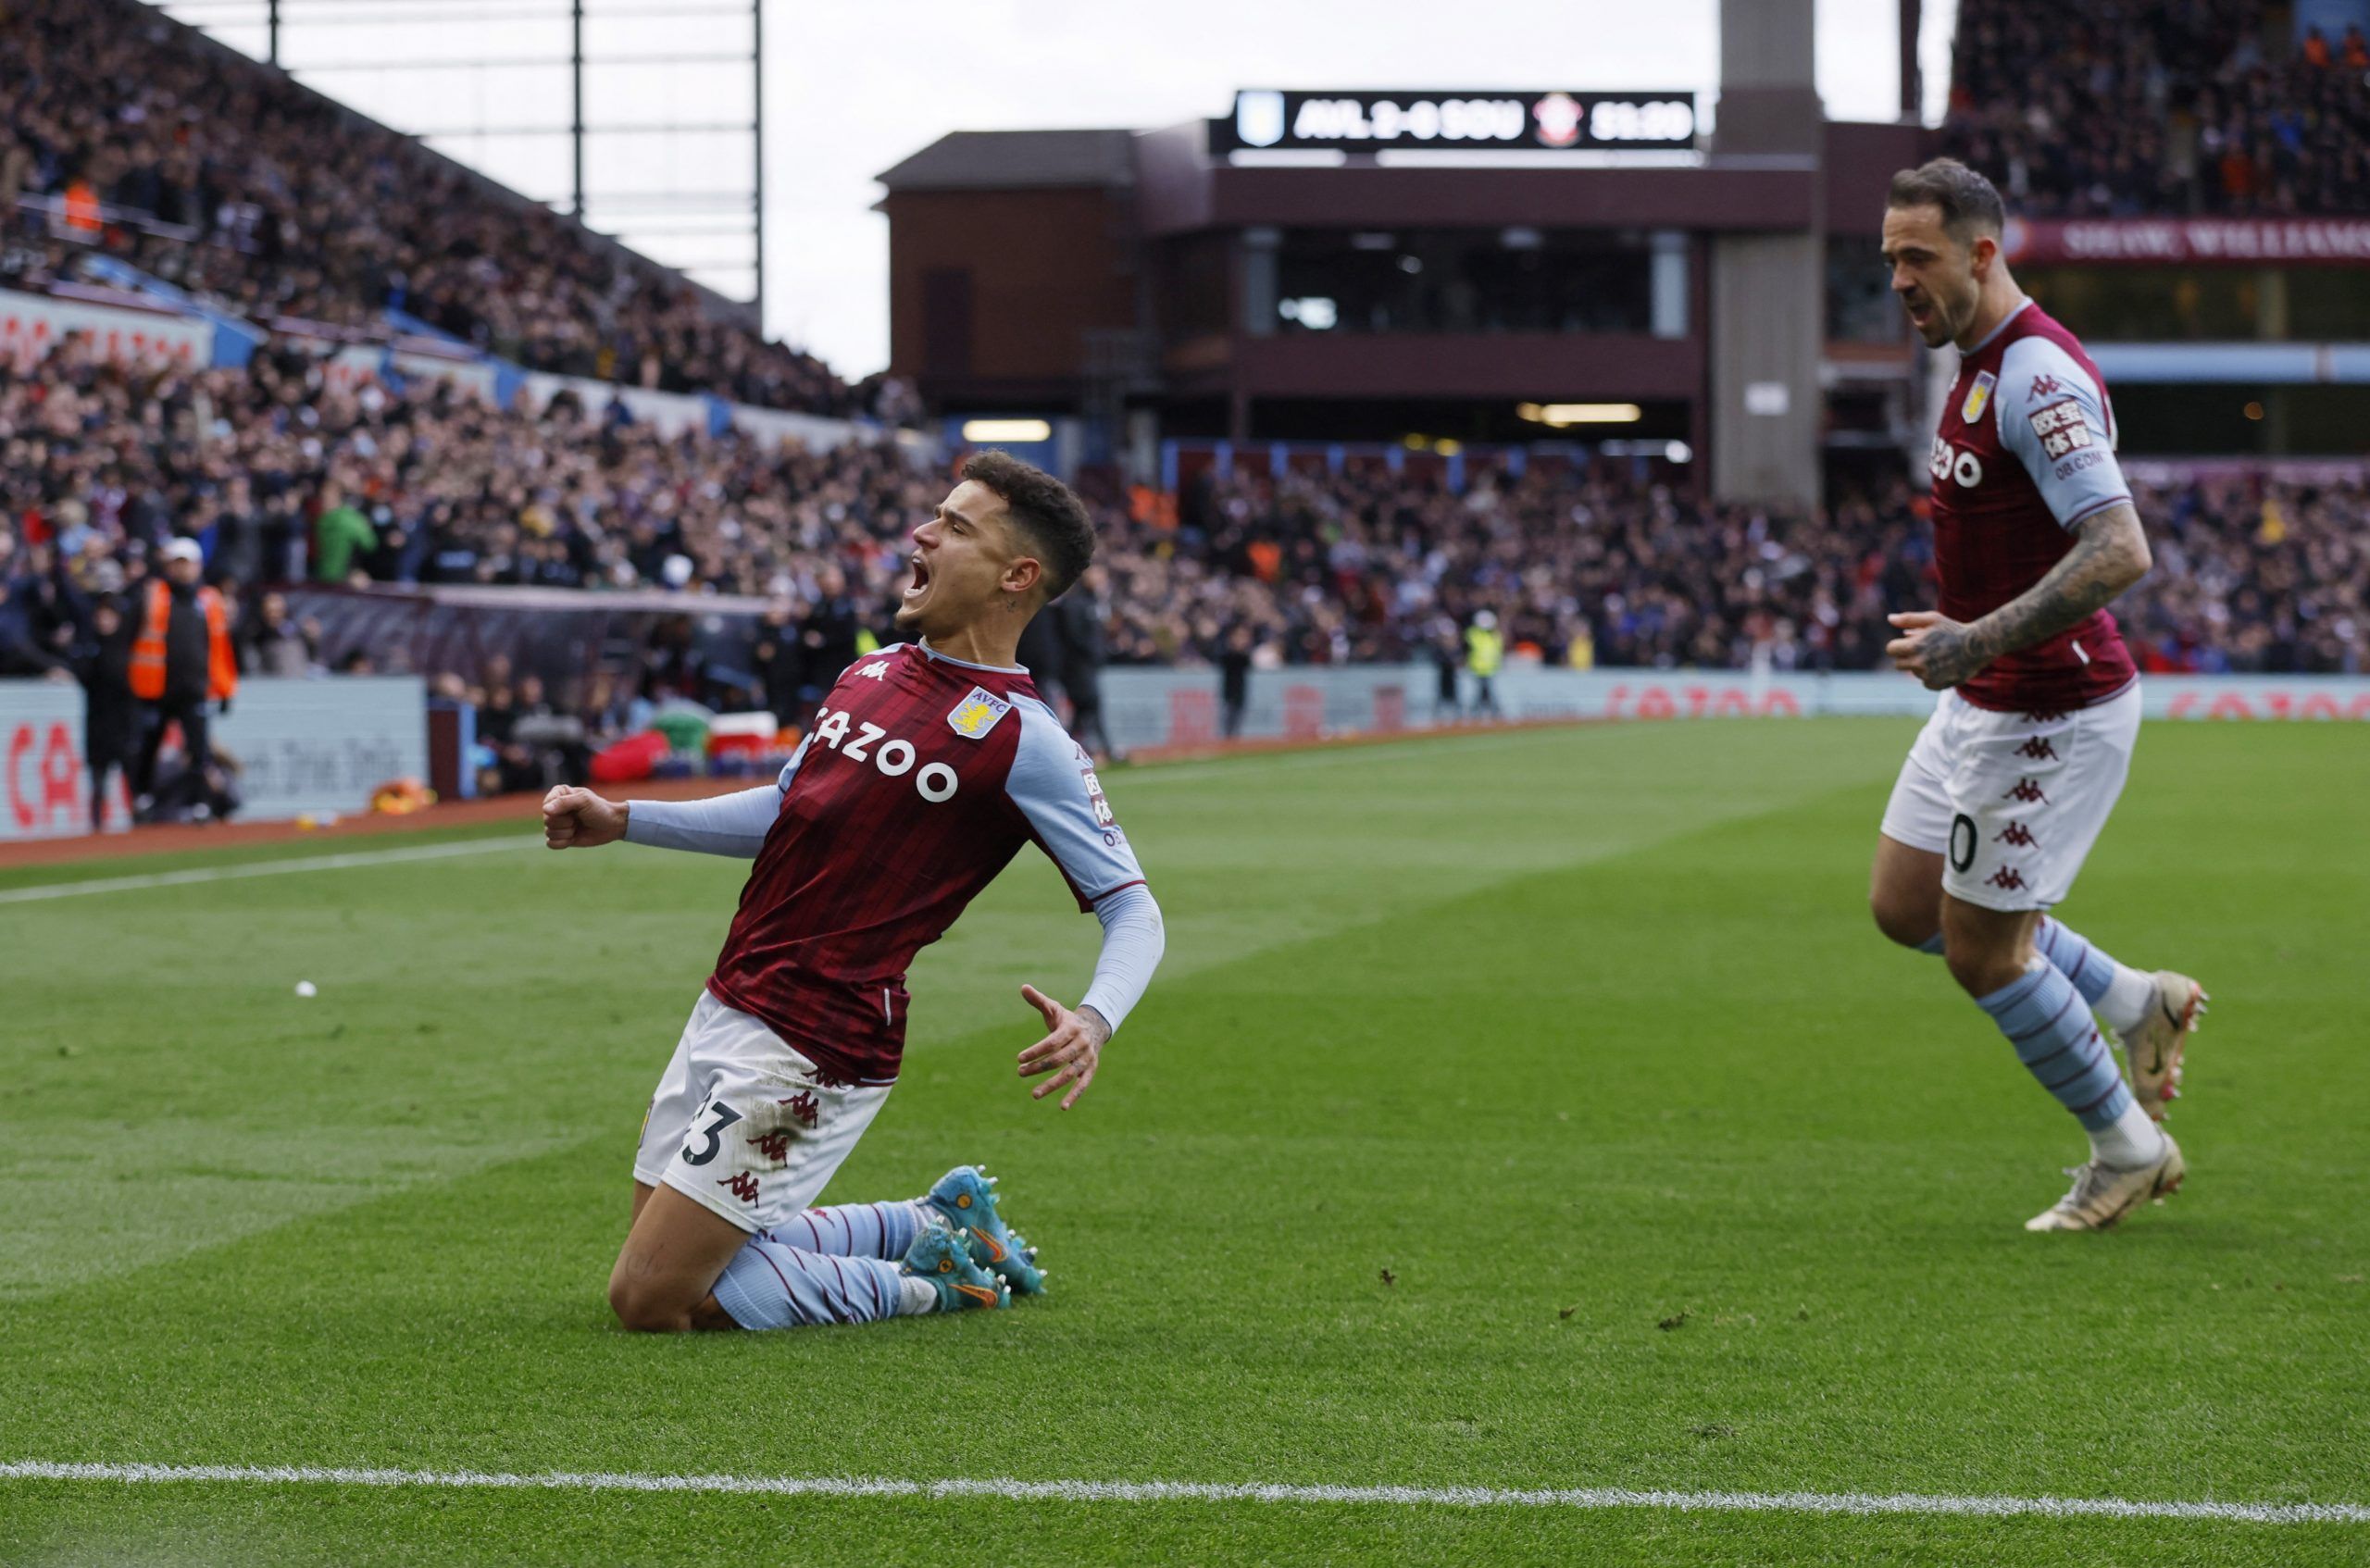 Soccer Football - Premier League - Aston Villa v Southampton - Villa Park, Birmingham, Britain - March 5, 2022 Aston Villa's Philippe Coutinho celebrates scoring their third goal Action Images via Reuters/Andrew Couldridge EDITORIAL USE ONLY. No use with unauthorized audio, video, data, fixture lists, club/league logos or 'live' services. Online in-match use limited to 75 images, no video emulation. No use in betting, games or single club /league/player publications.  Please contact your account